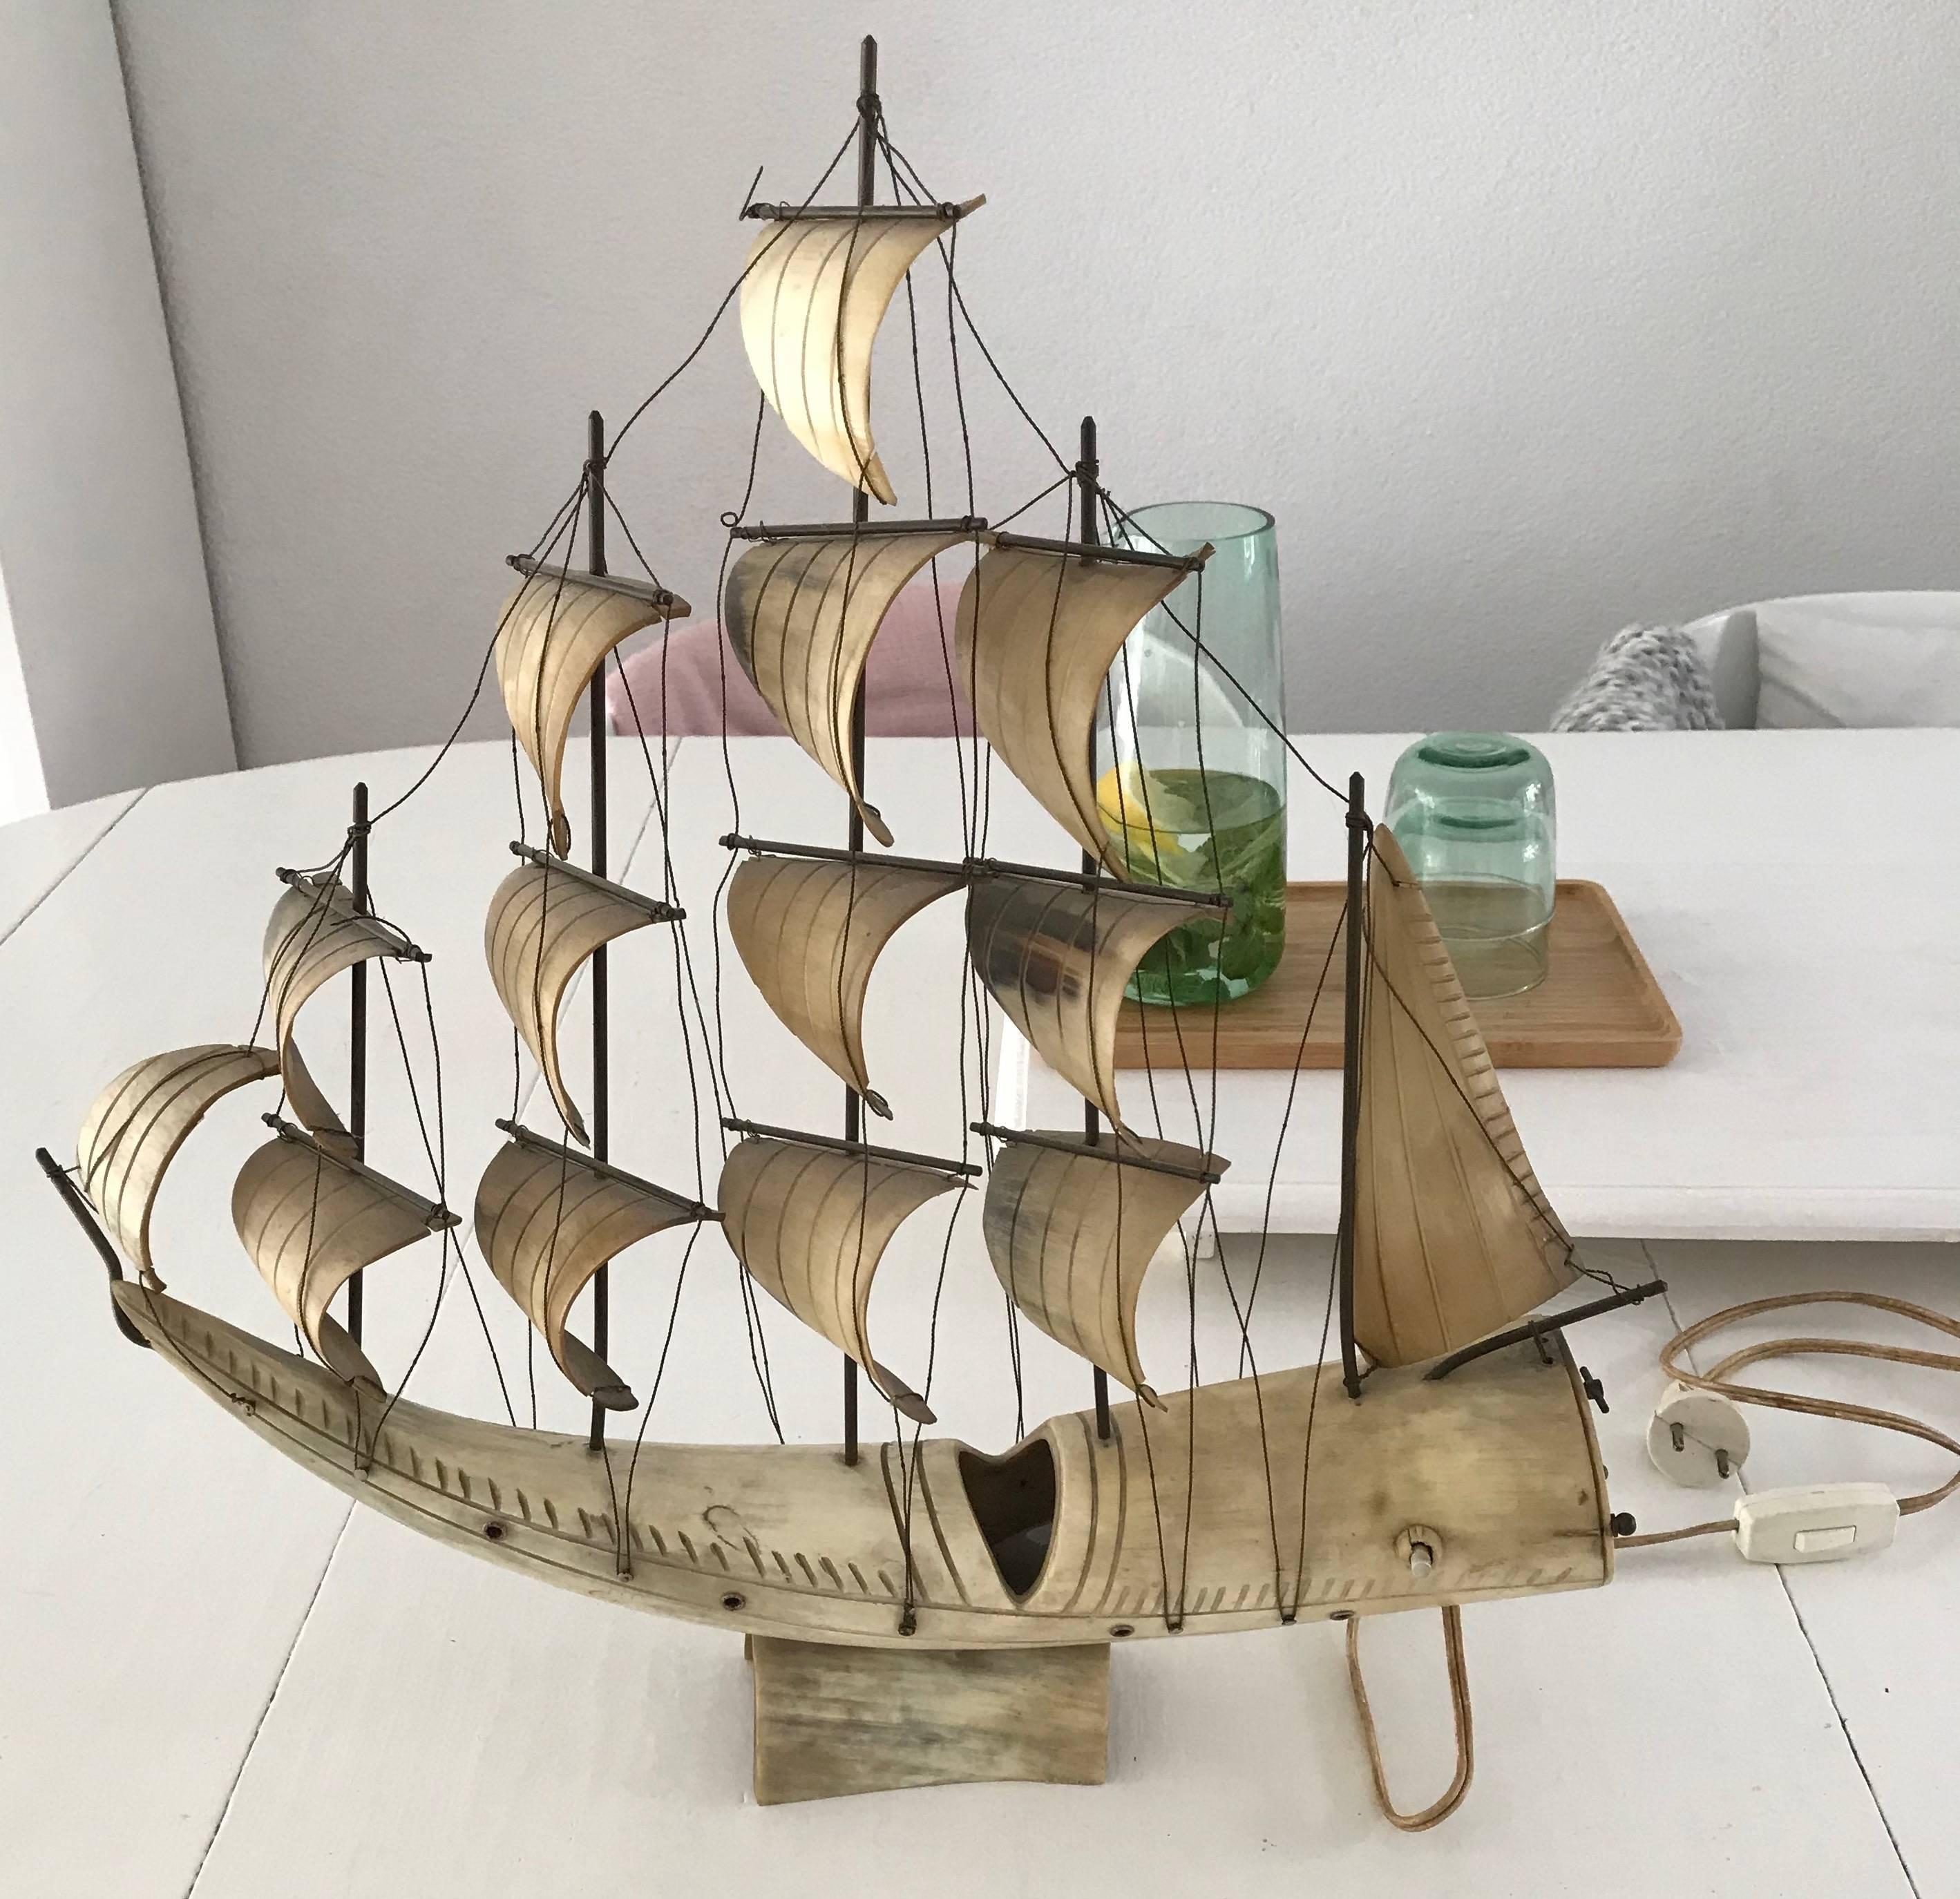 Folk Art Amazing Midcentury Horn Made Sailing Yacht Table Lamp with Swiss Music Movement